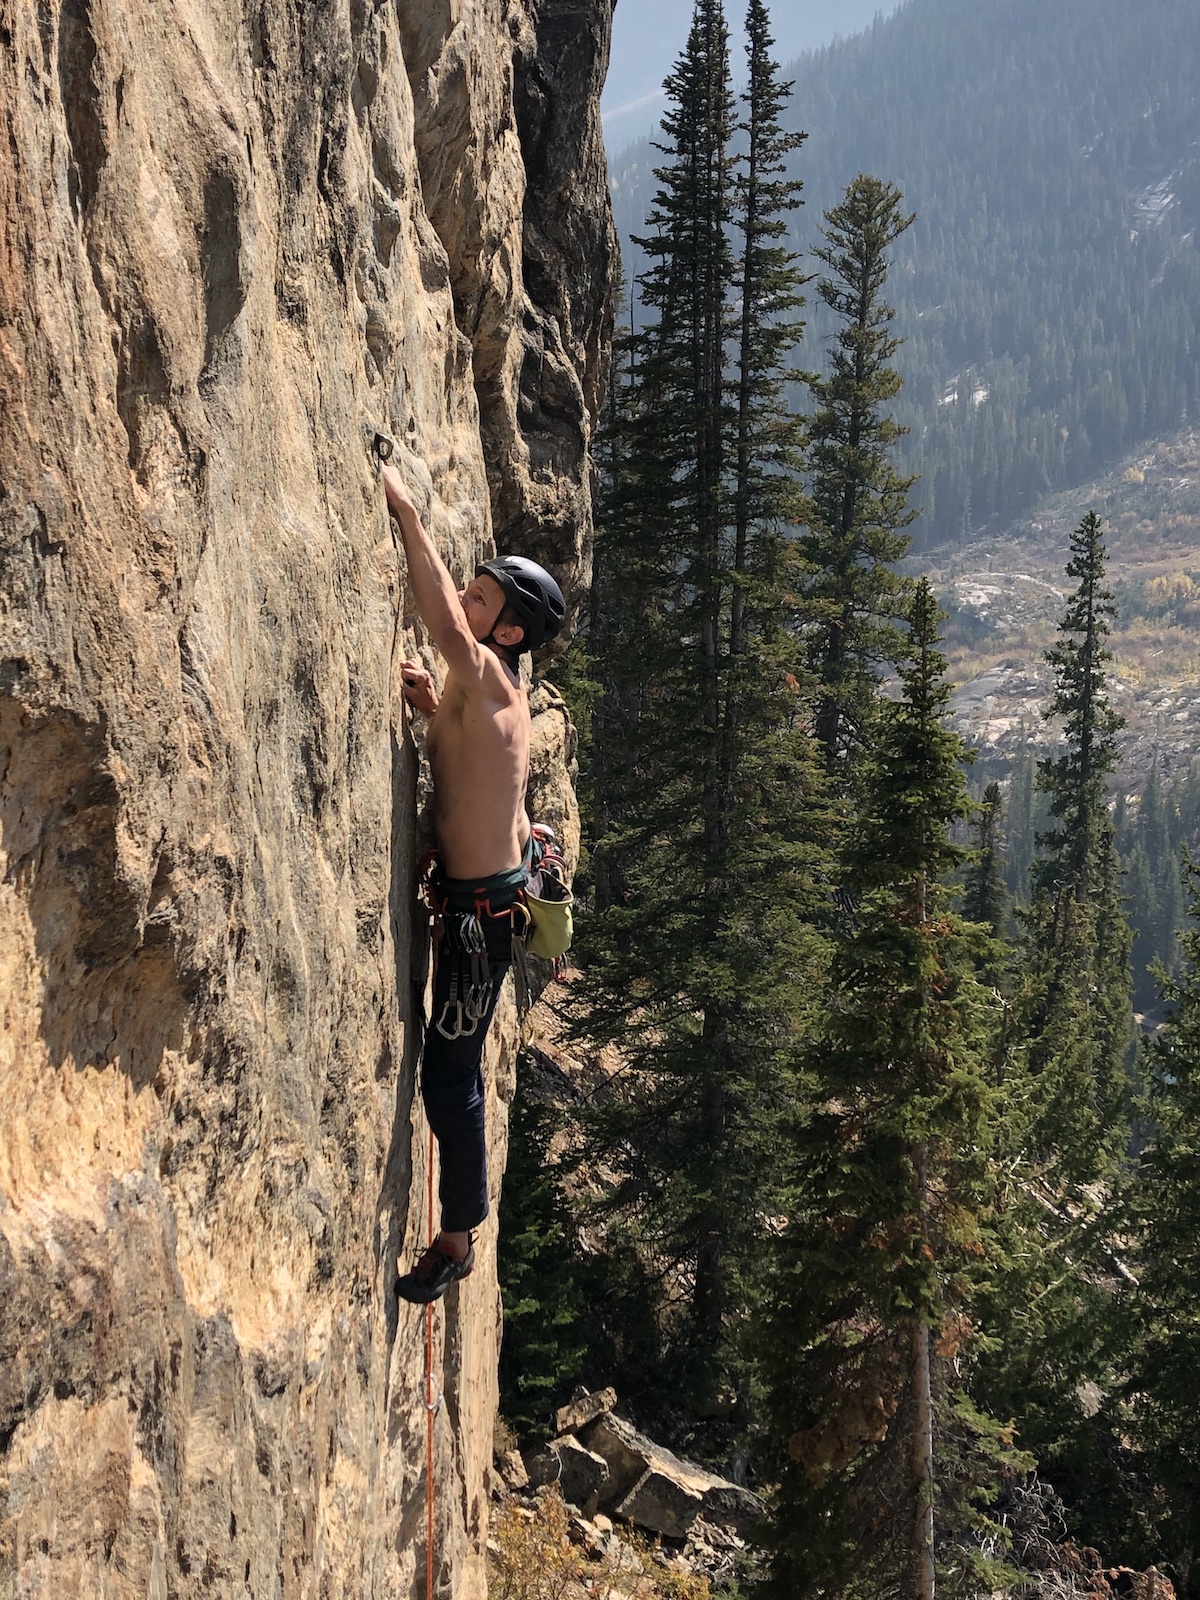 Derek Franz stays relaxed wearing the Black Diamond Vision MIPS helmet while onsighting Rock Candy (5.12a), a thin slippery route on Independence Pass, Colorado. [Photo] Elizabeth Riley